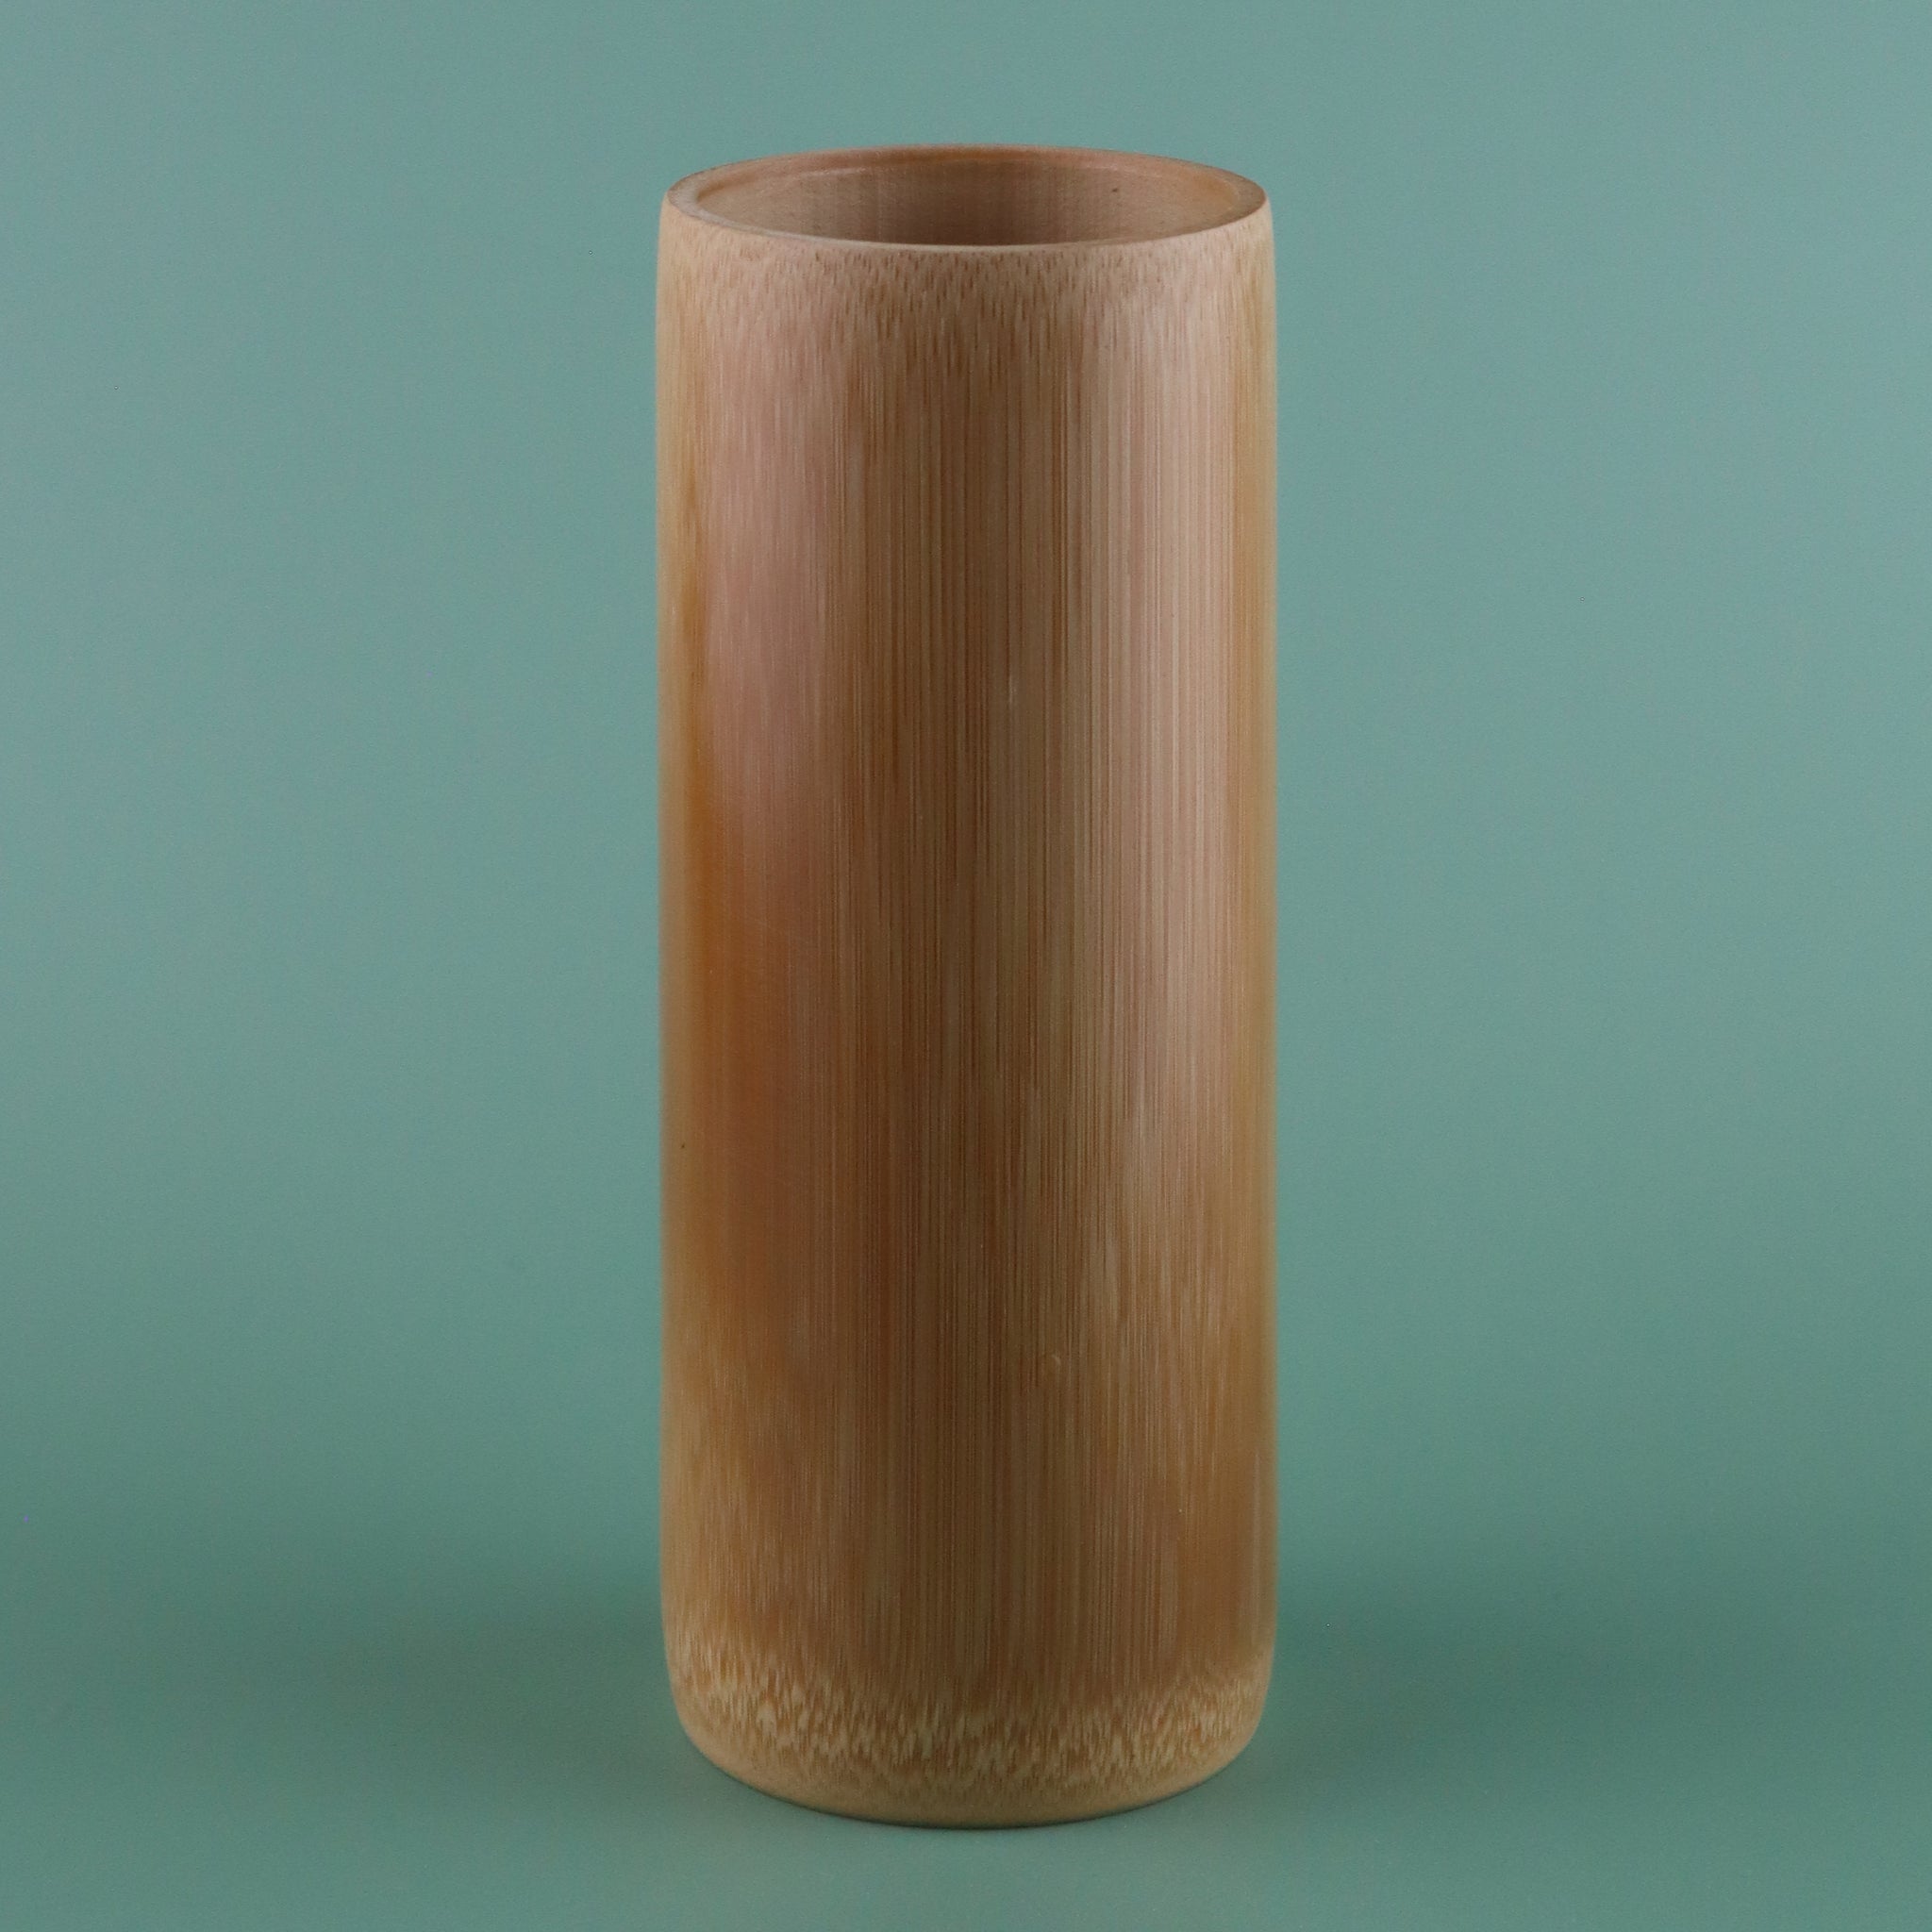 JUNGLE CULTURE BAMBOO TALL CUPS/VASE (HOLDS 17 OZ) - SMOOTHIES, COCKTA –  Pandan Market